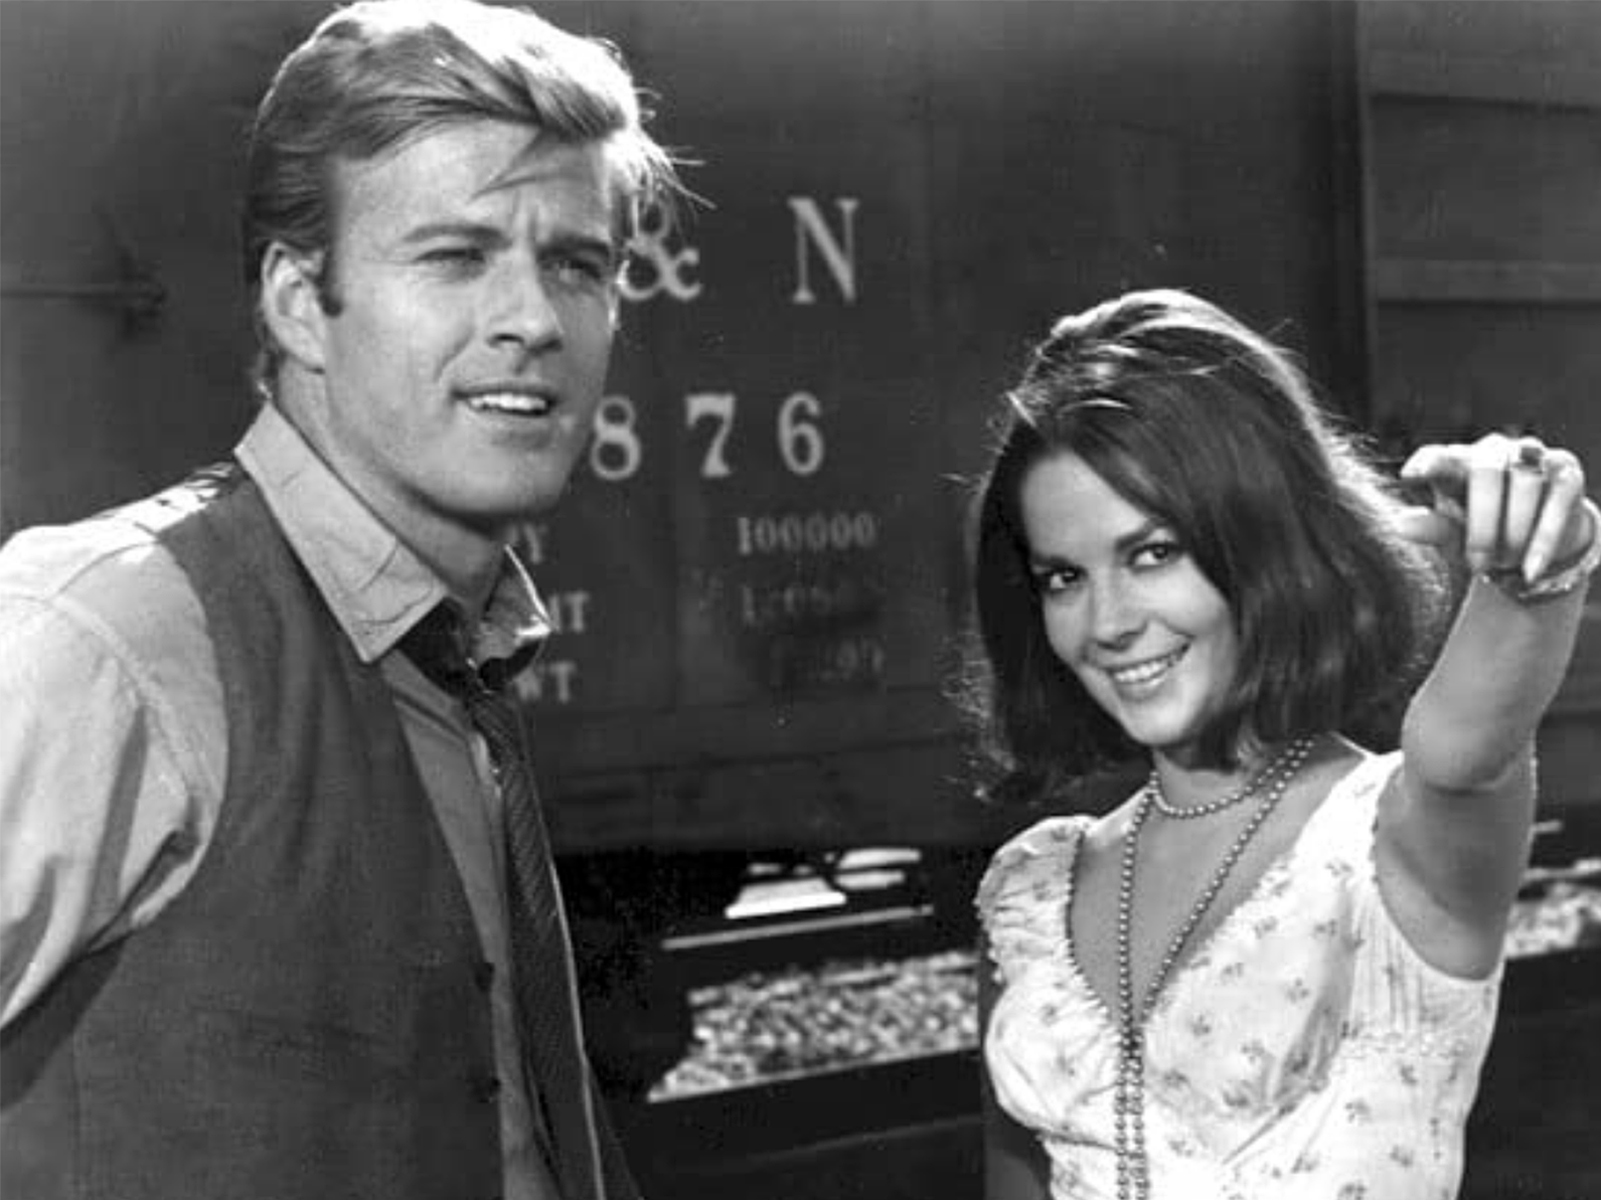 Natalie Wood and Robert Redford in “This Property Is Condemned” (1966)